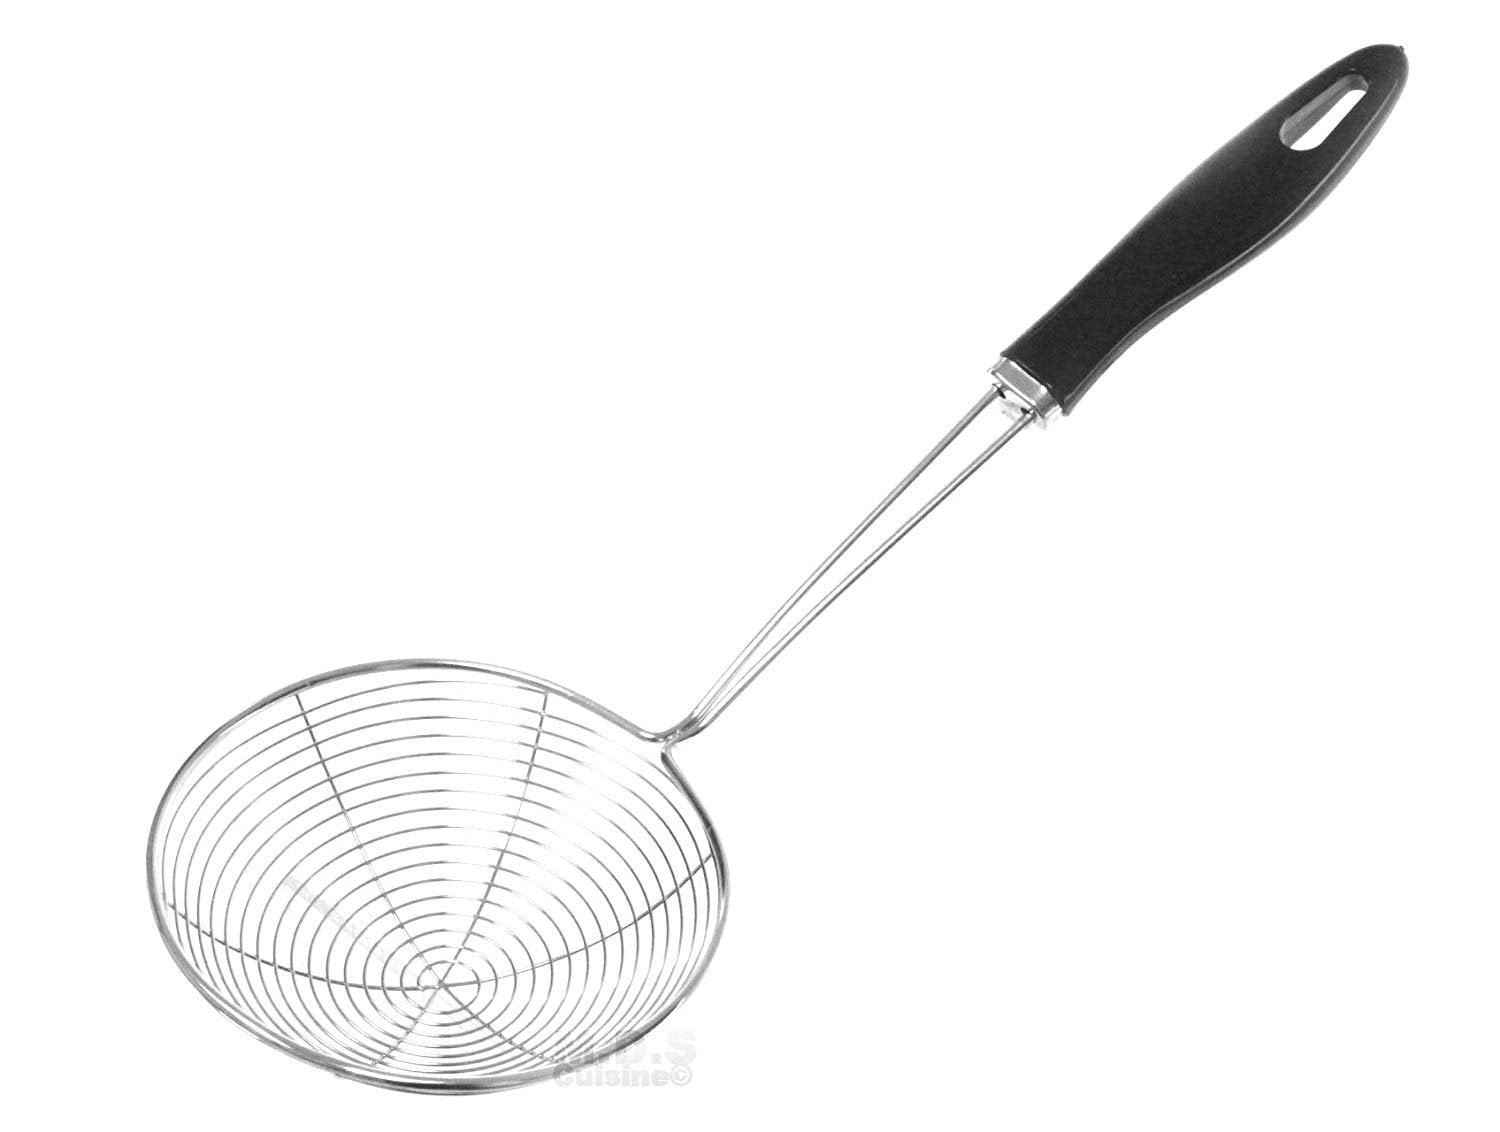 Stainless Steel Slotted Skimmer Spoon Strainer Skimmer for Cooking with Wooden Handle